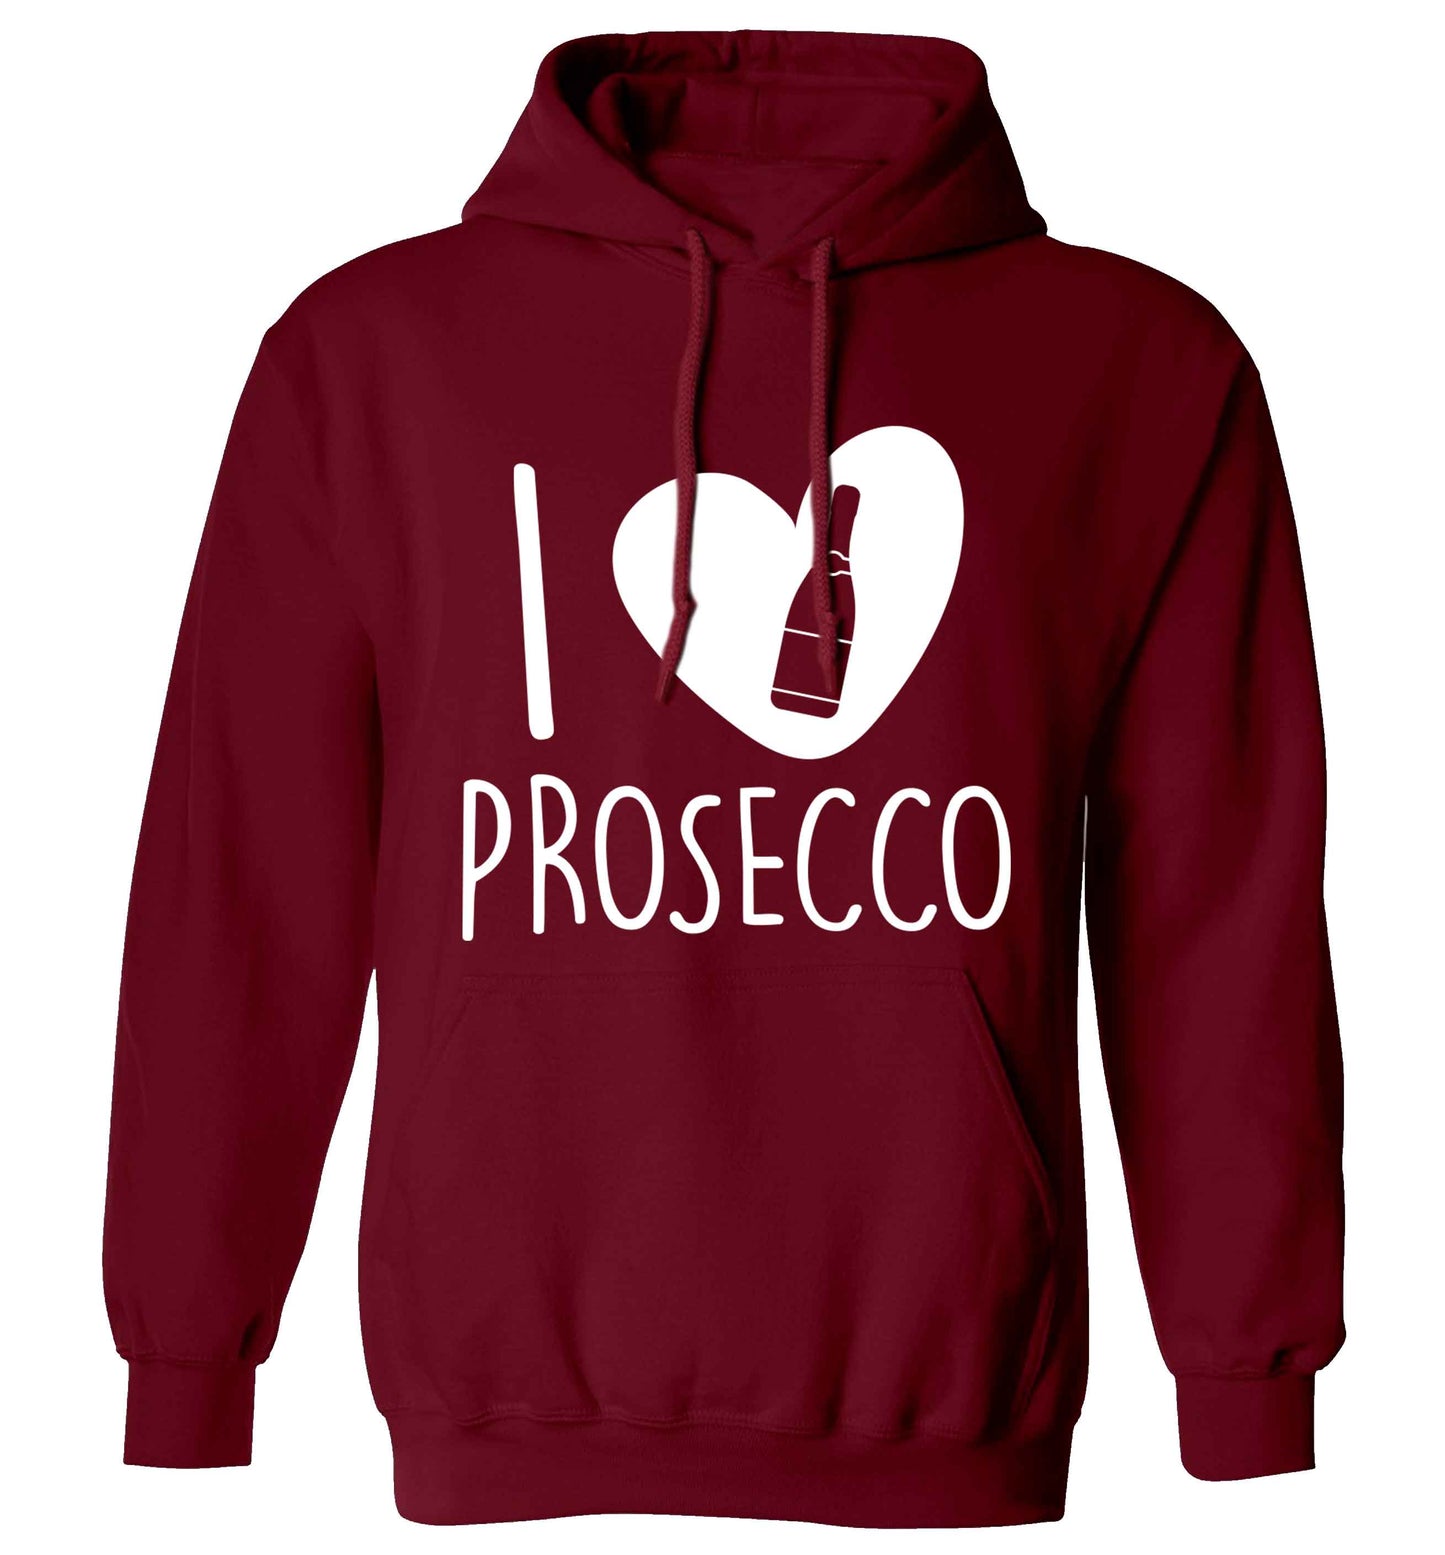 I love prosecco adults unisex maroon hoodie 2XL